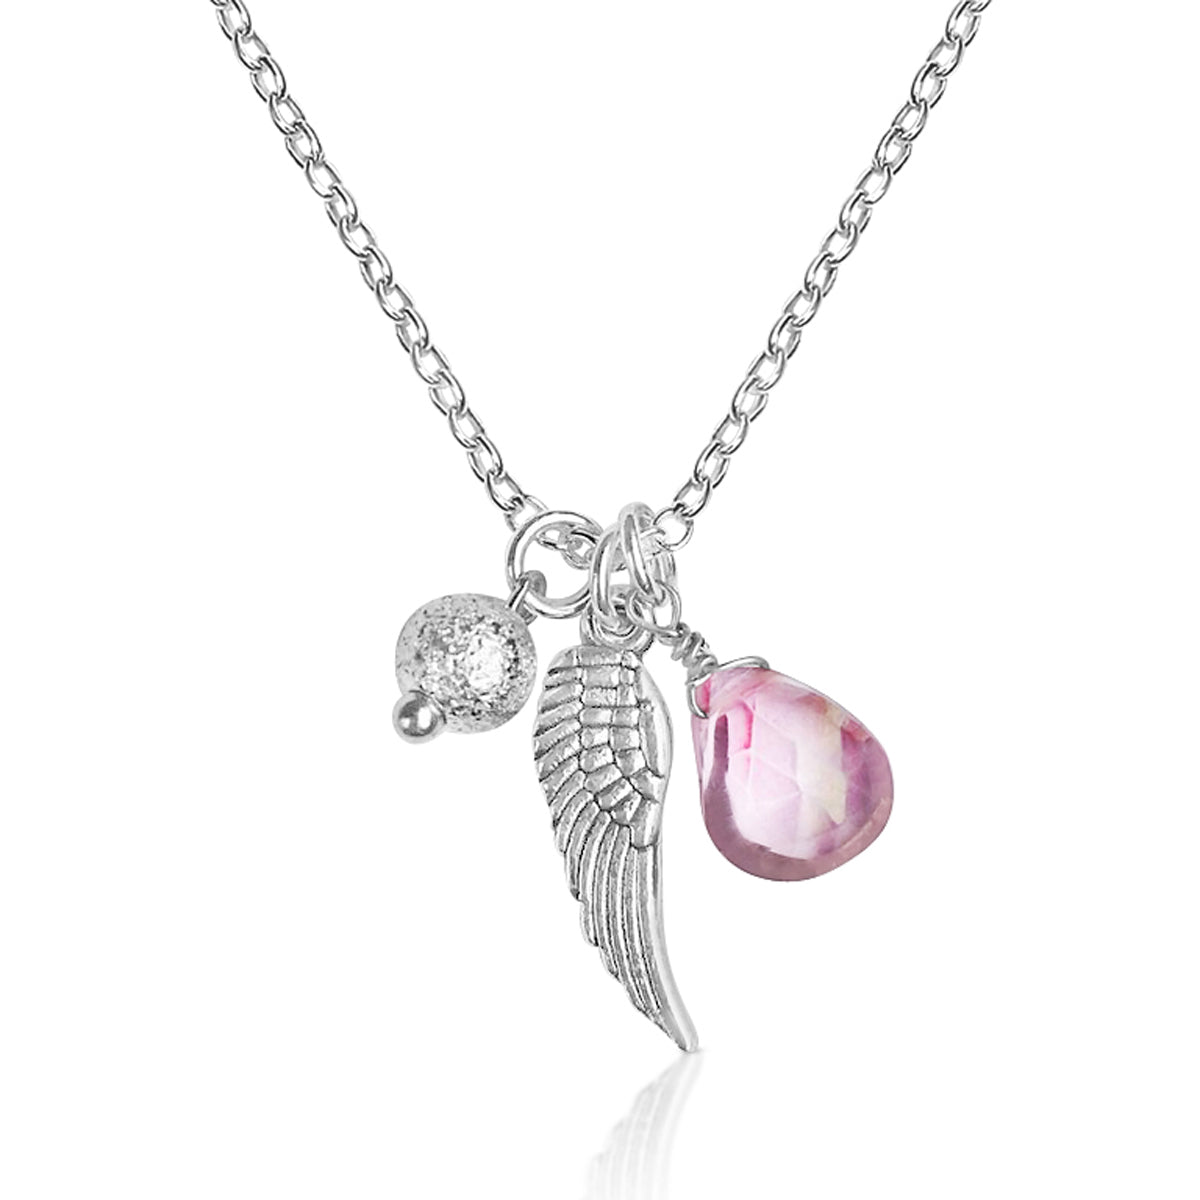 Silver Lovely Thoughts Necklace with Protective Angel Wing